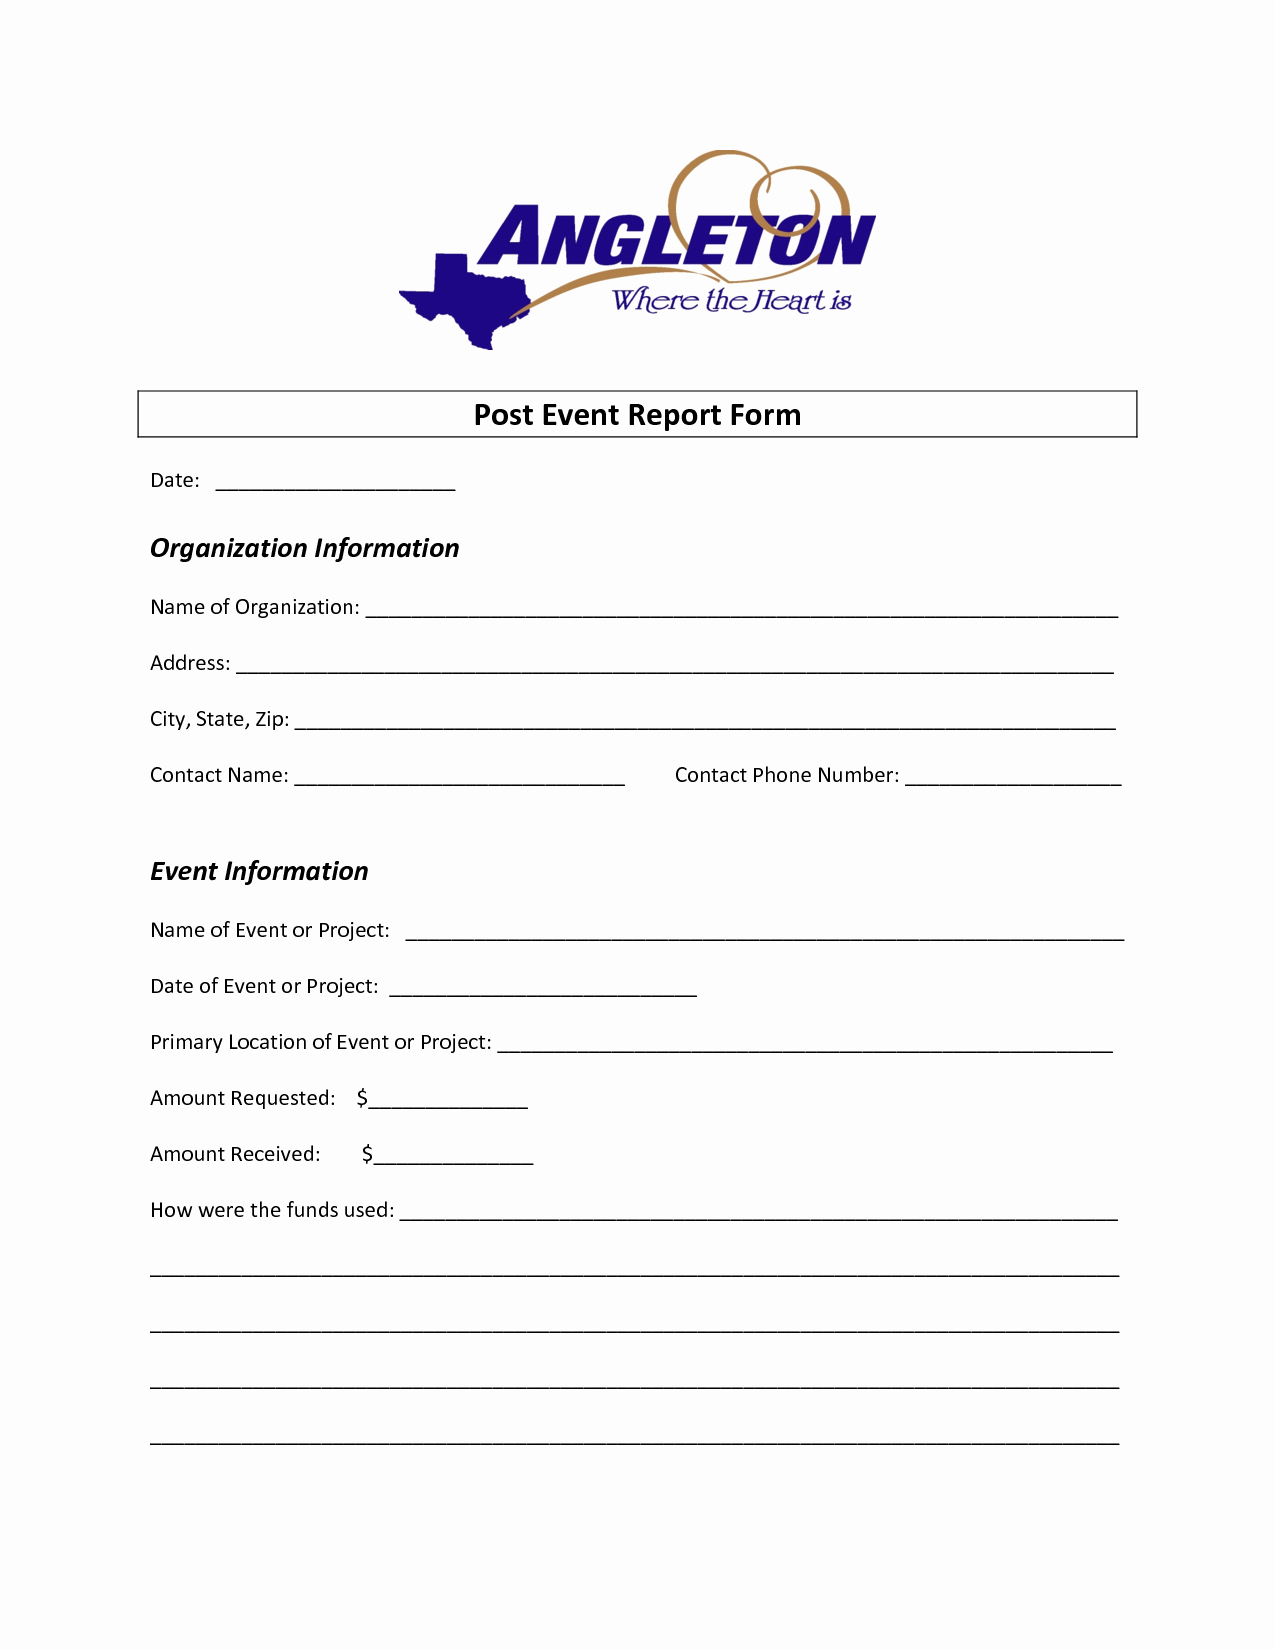 Post event Report Template Fresh Best S Of Post event Report Sample Sample event